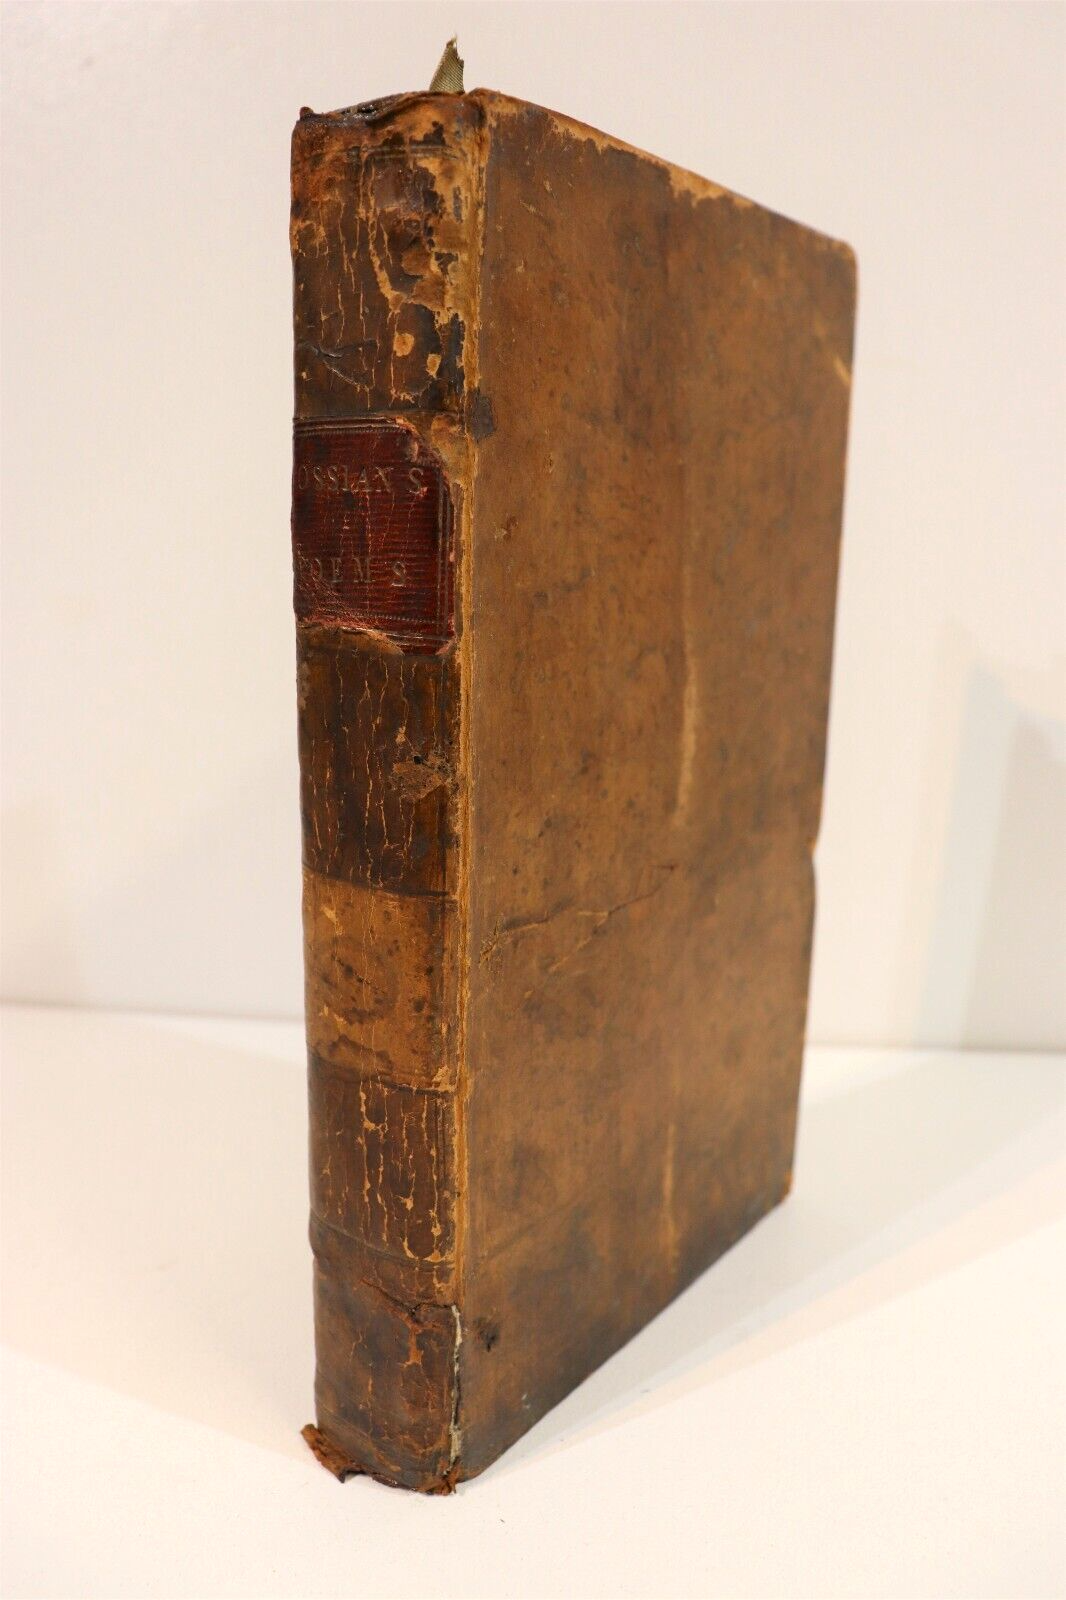 The Poems Of Ossian - 1790 - Antique Poetry Book